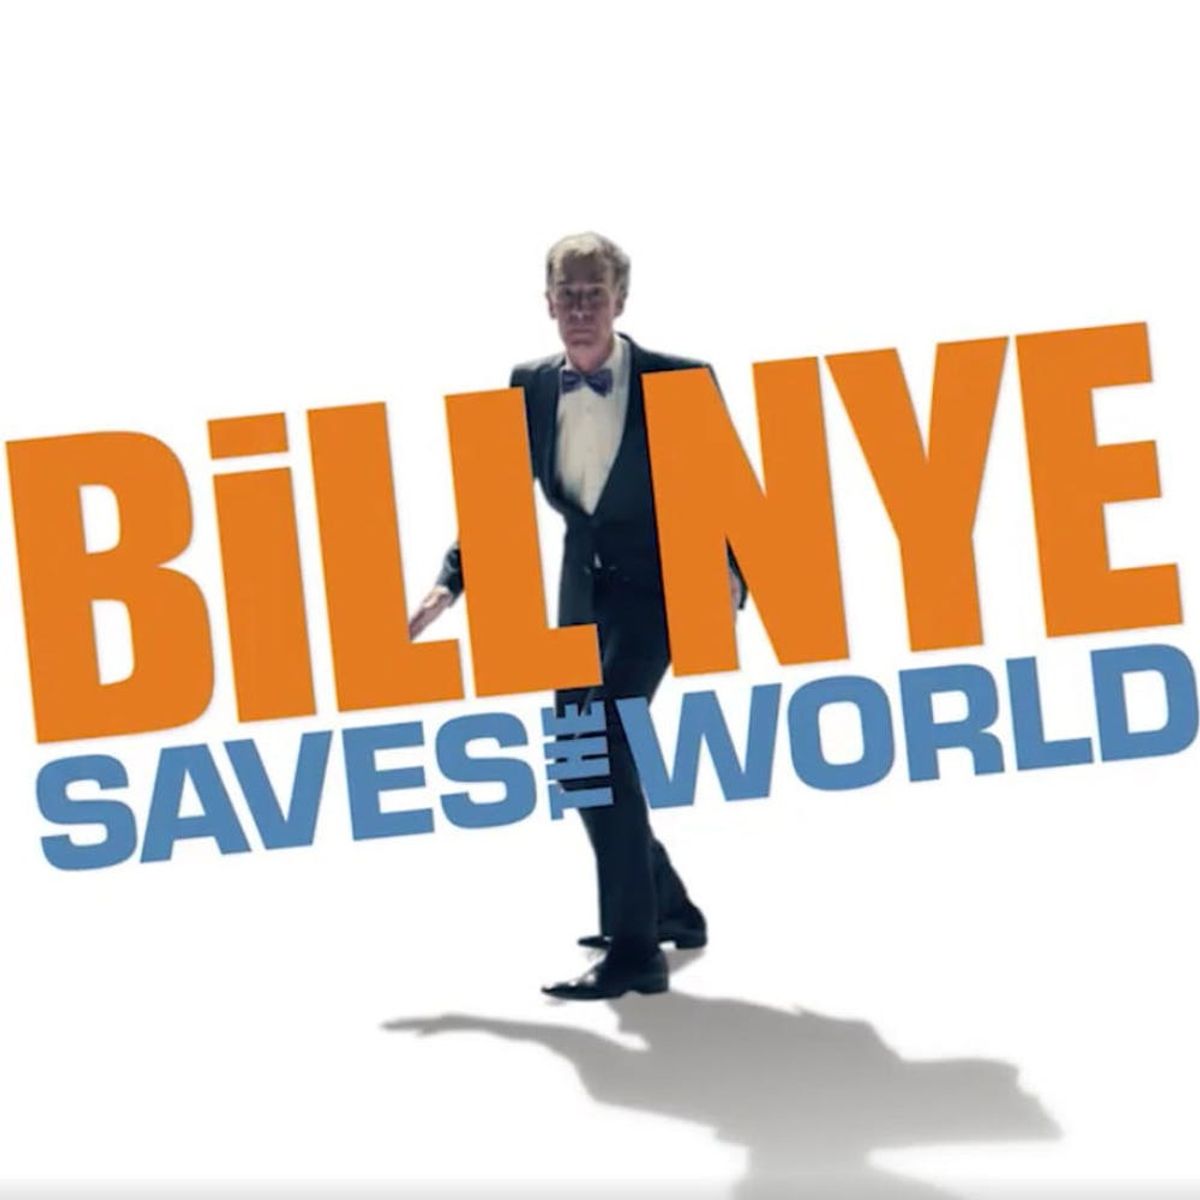 4 Shows to Watch When You Finish Bill Nye Saves the World